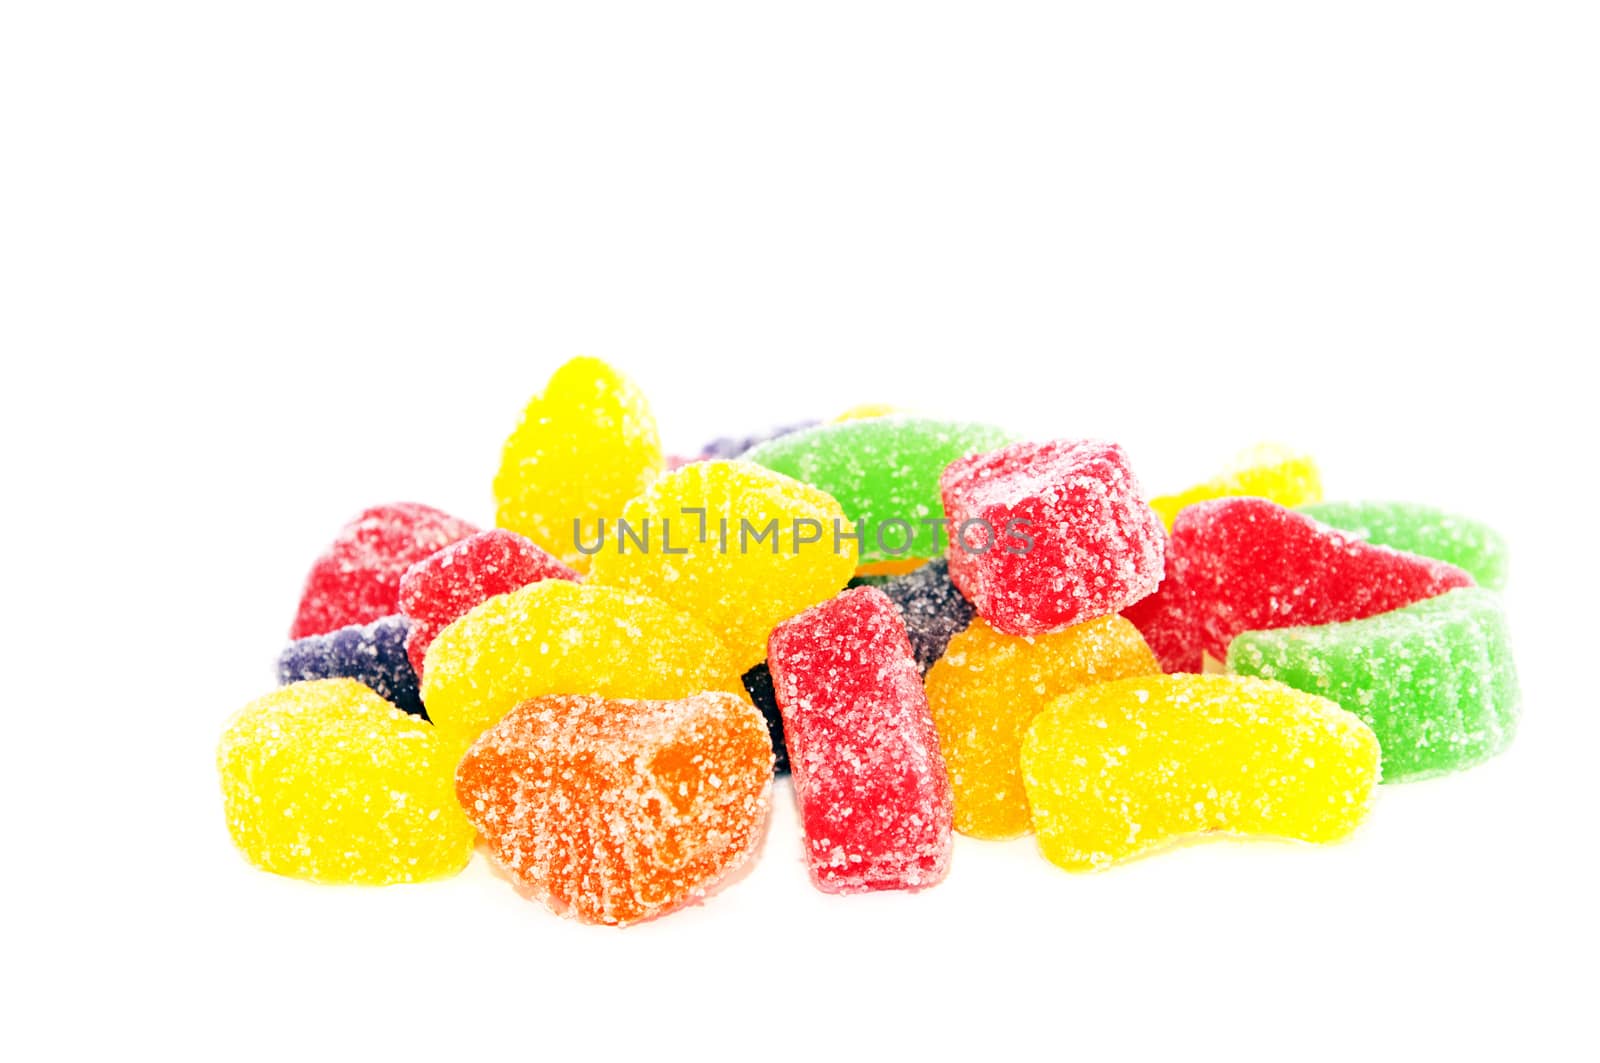 Colorful gum drop candy in a high-key photo isolated on white background